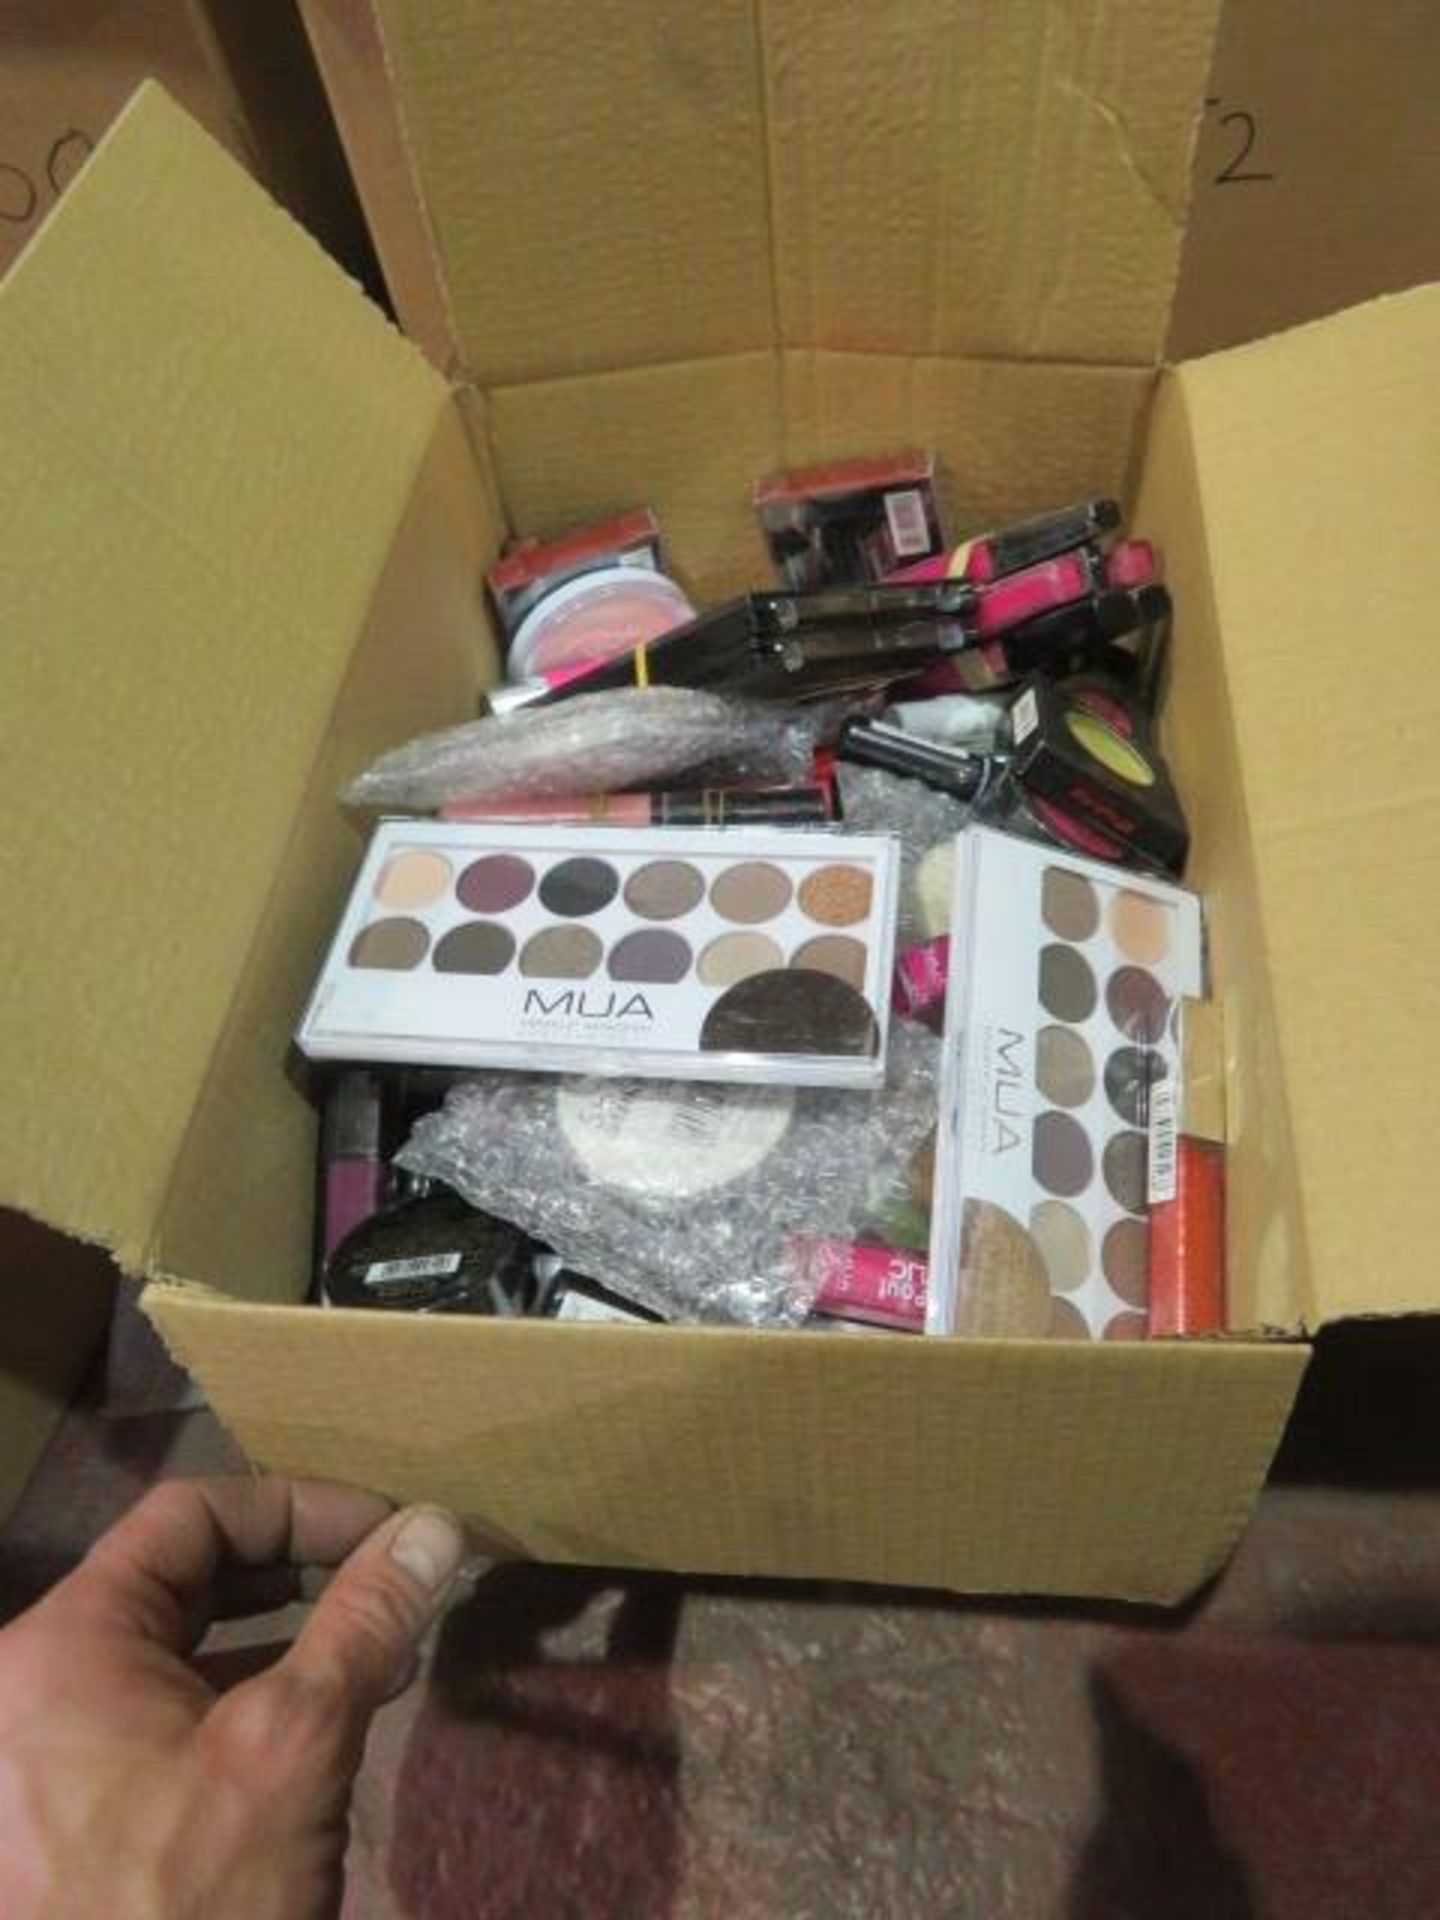 Circa. 200 items of various new make up acadamy make up to include: powerpout glaze, skin defin... - Image 2 of 2